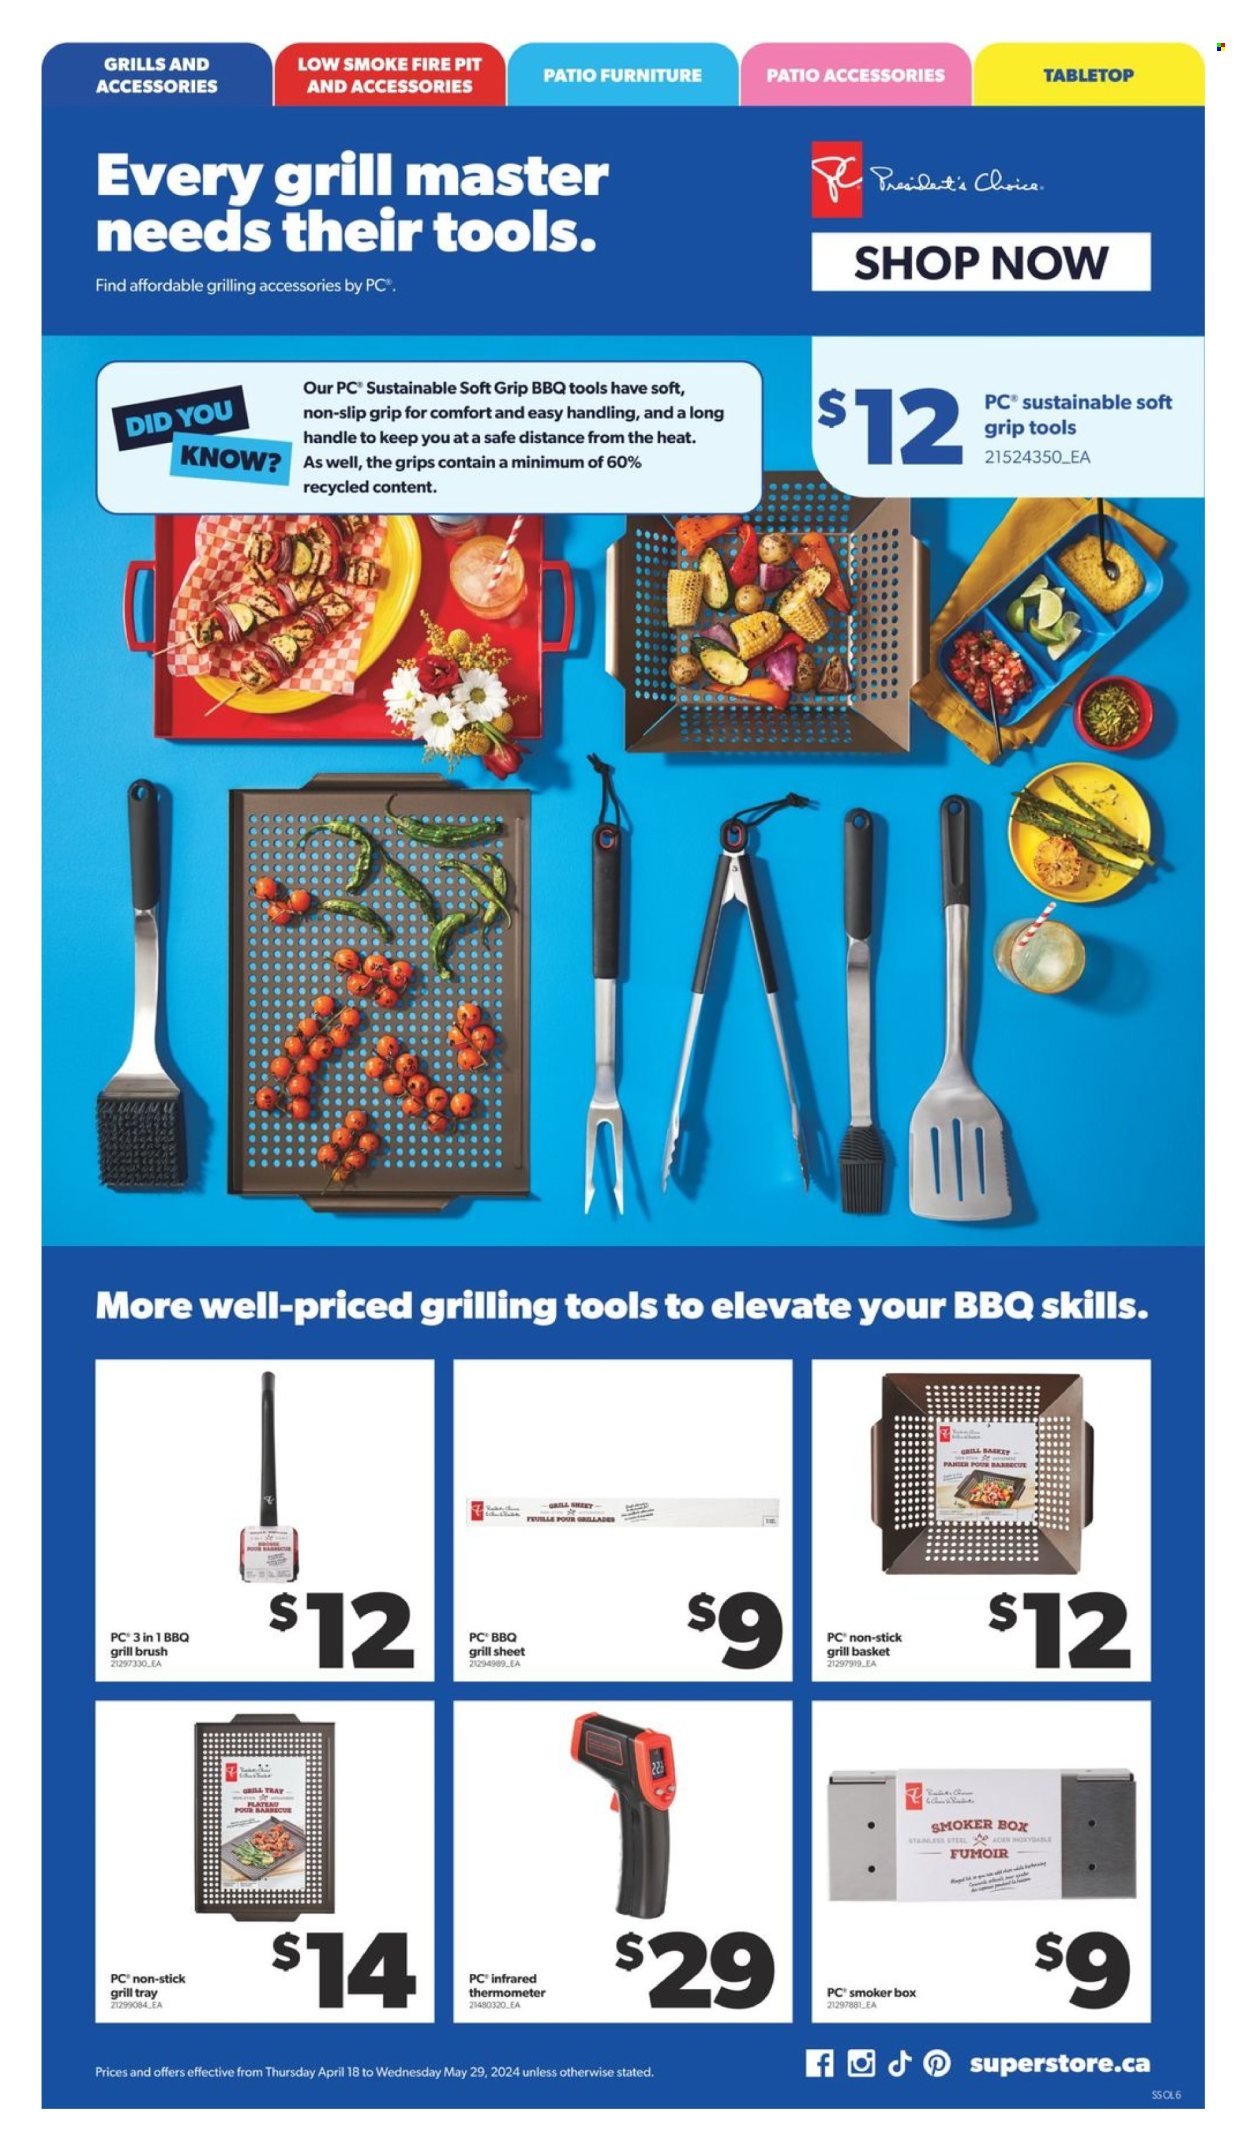 Real Canadian Superstore flyer  - April 18, 2024 - May 29, 2024.